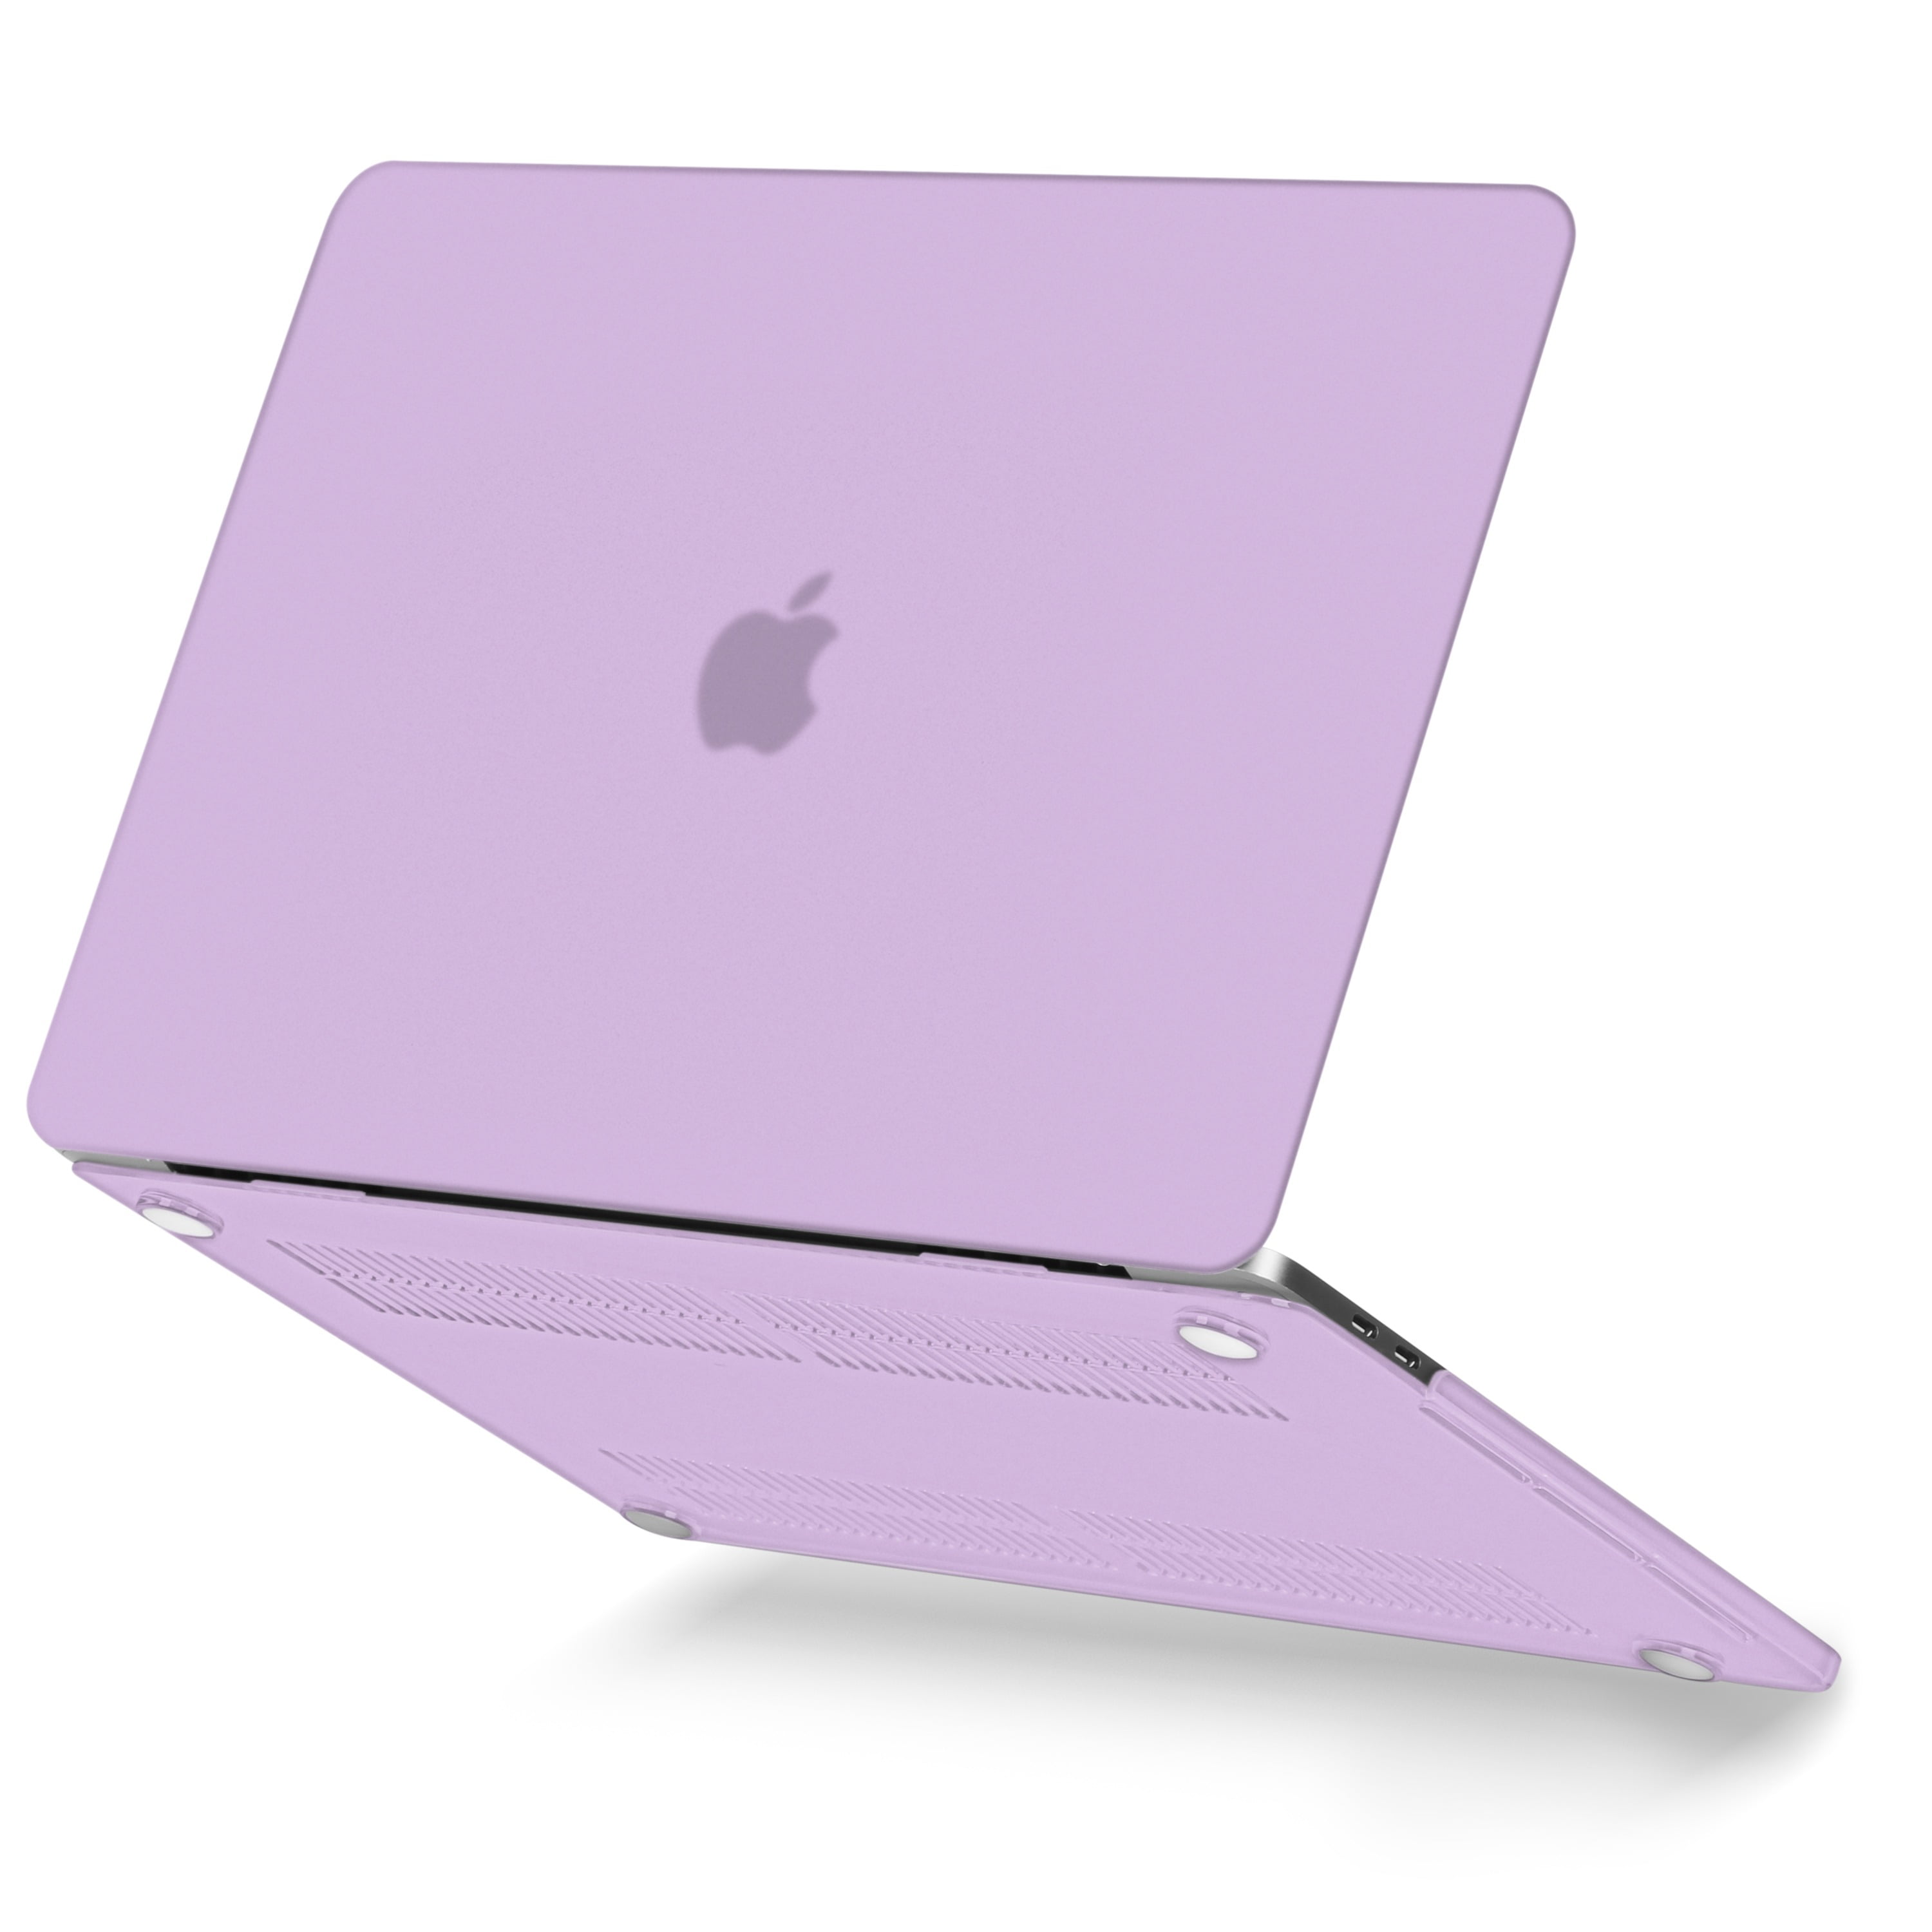 MacBook Pro 13 Cases White Spring Retro Lilac Flower Plastic Hard Shell Compatible Mac Air 11 Pro 13 15 Mac Book Pro Cases Protection for MacBook 2016-2019 Version